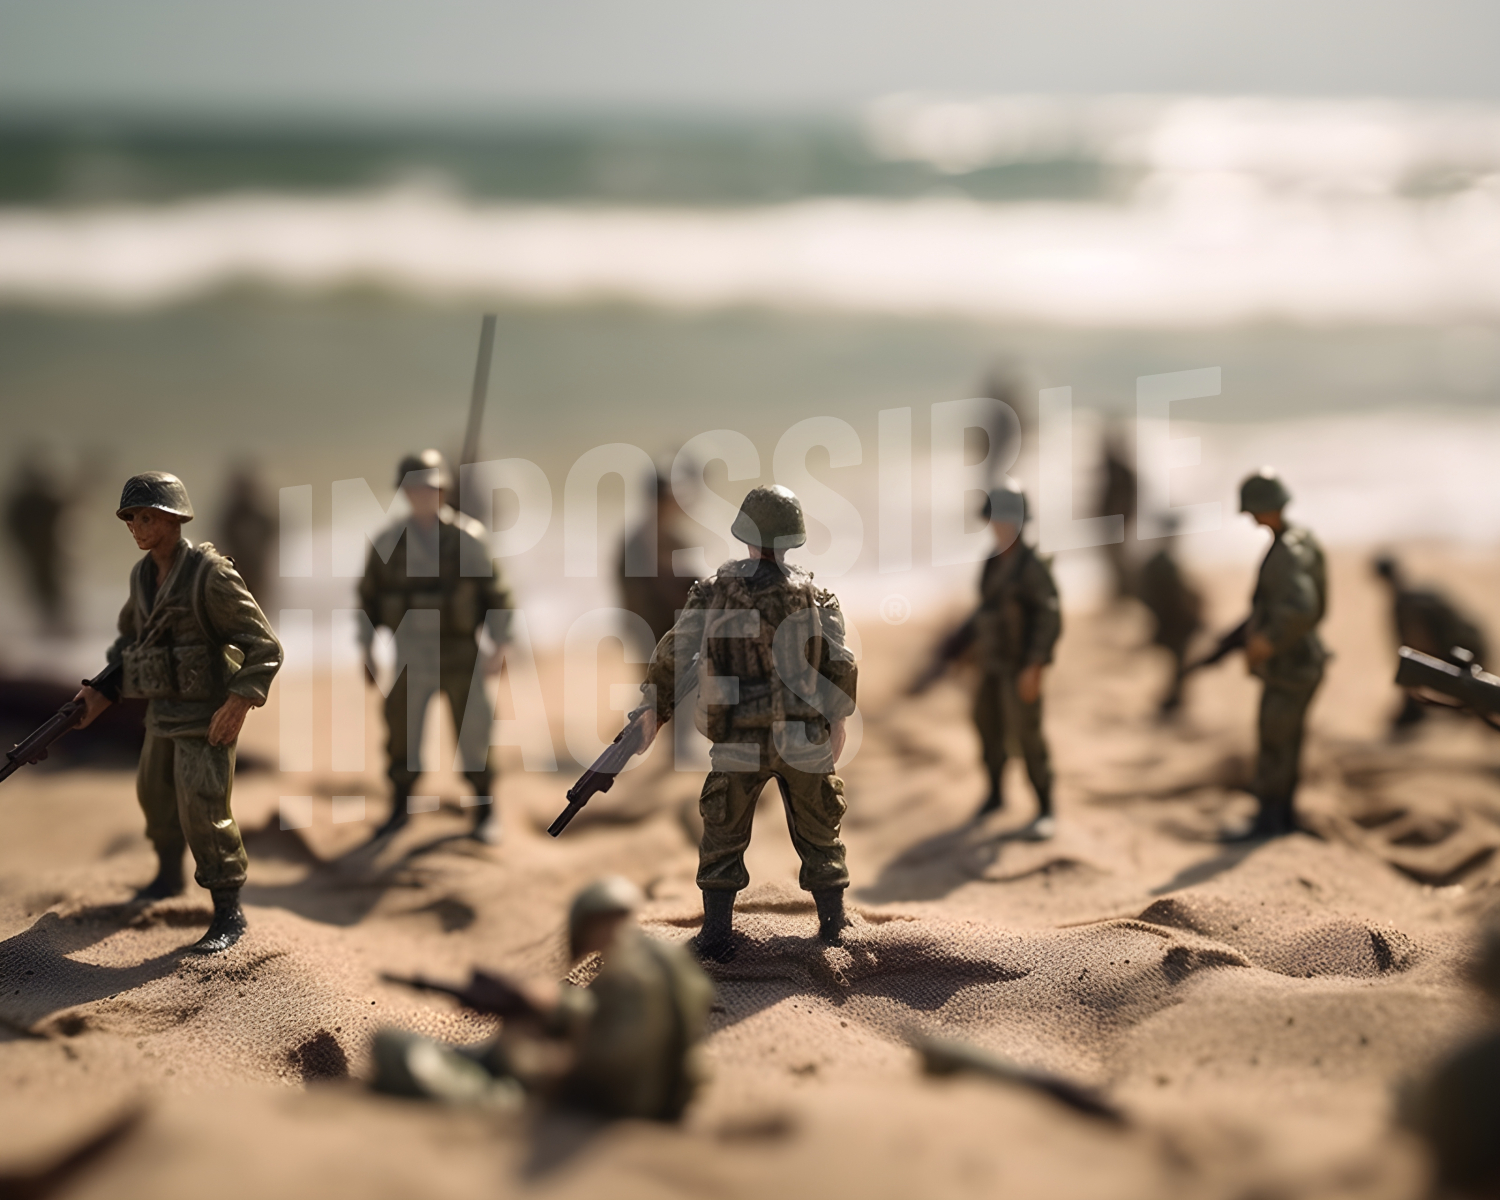 A group of toy soldiers standing on top of a sandy beach